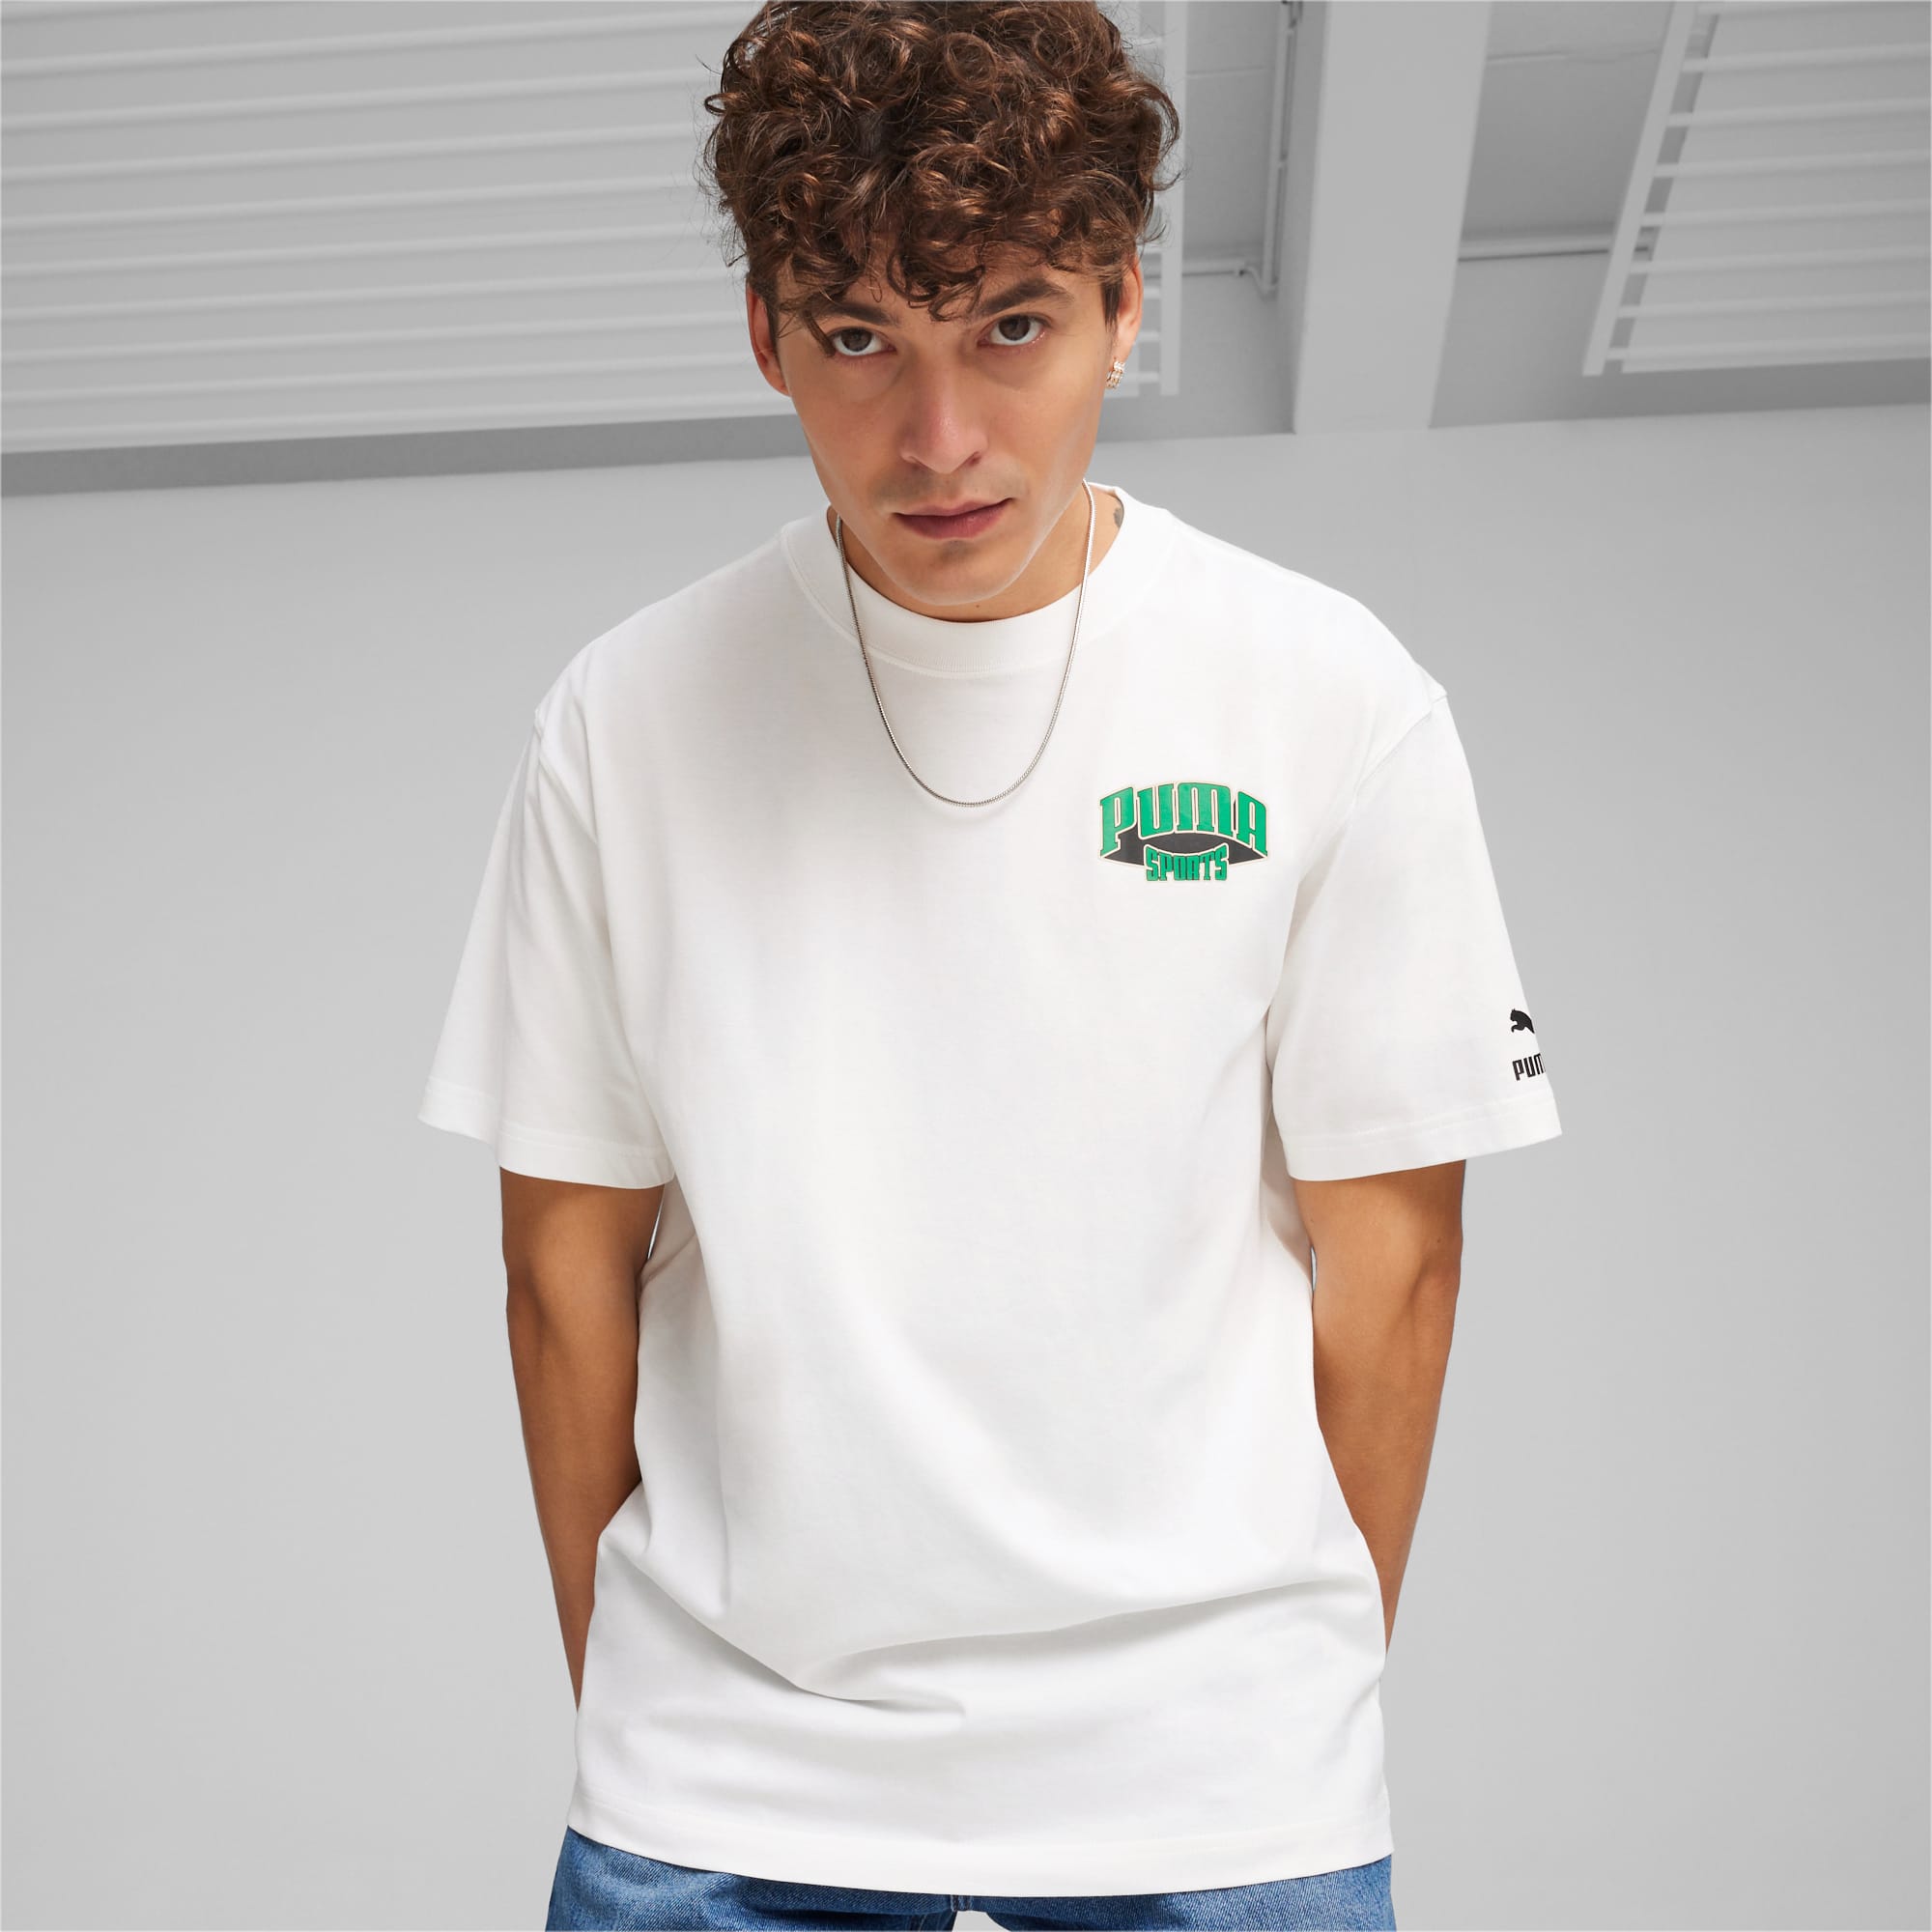 Mens Graphic T-Shirts, Graphic Tees Men